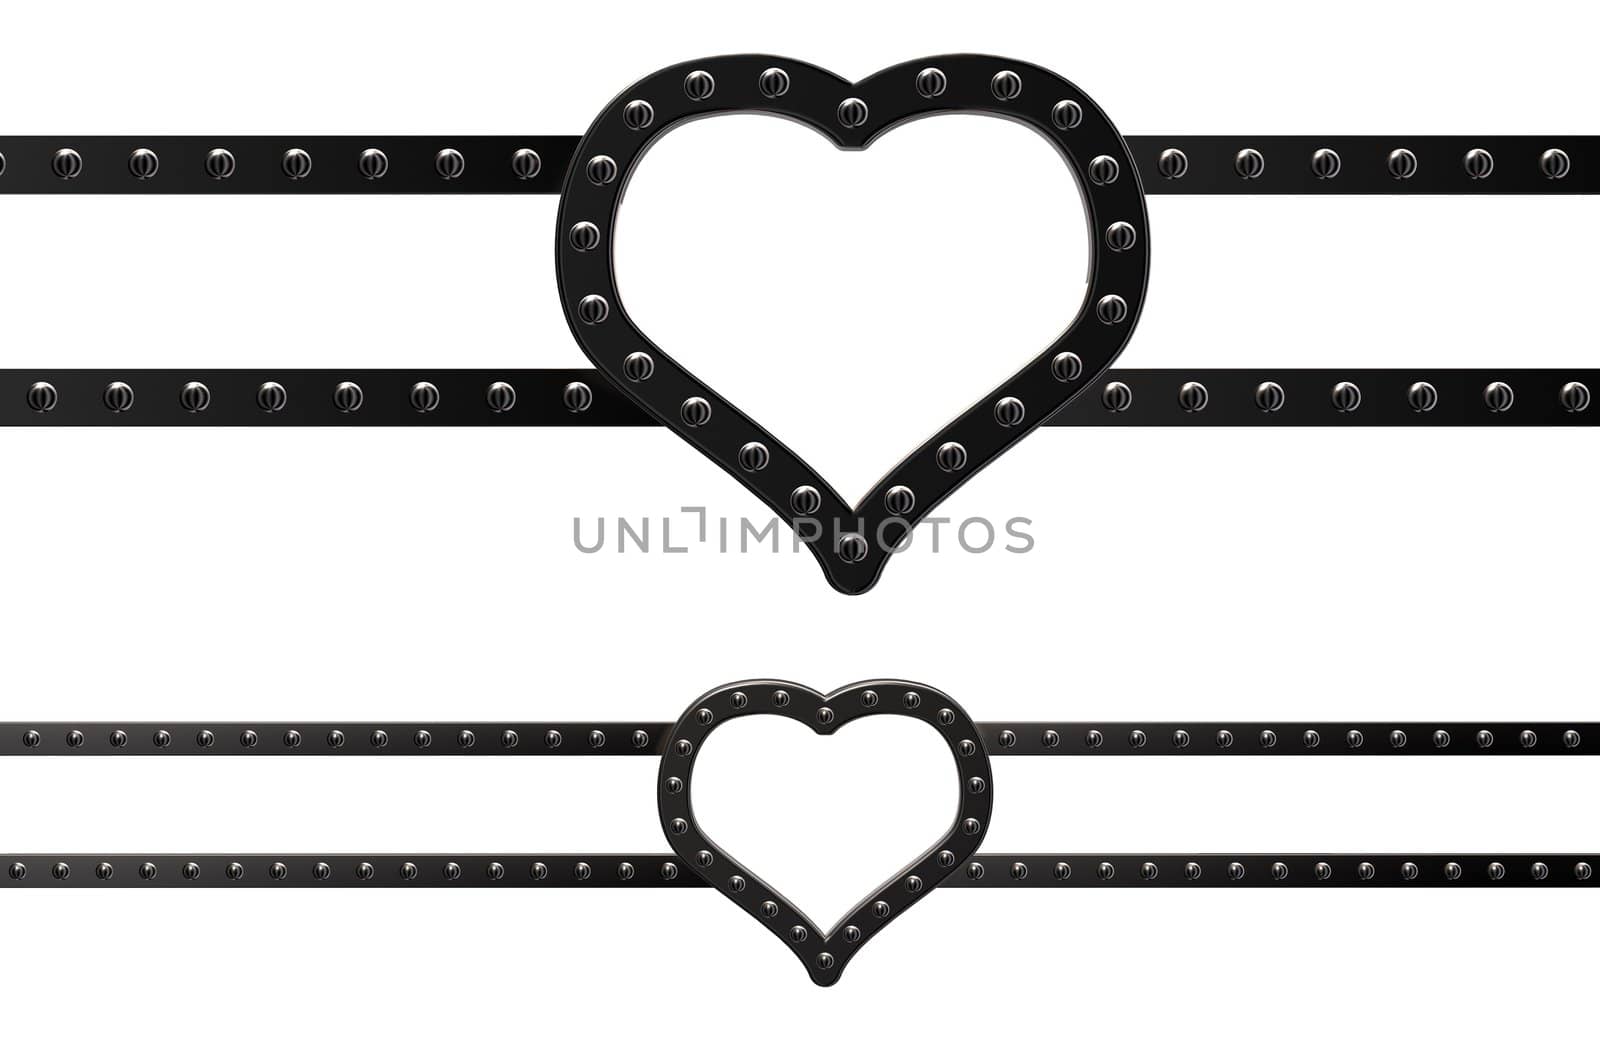 riveted metal hearts on white background - 3d illustration